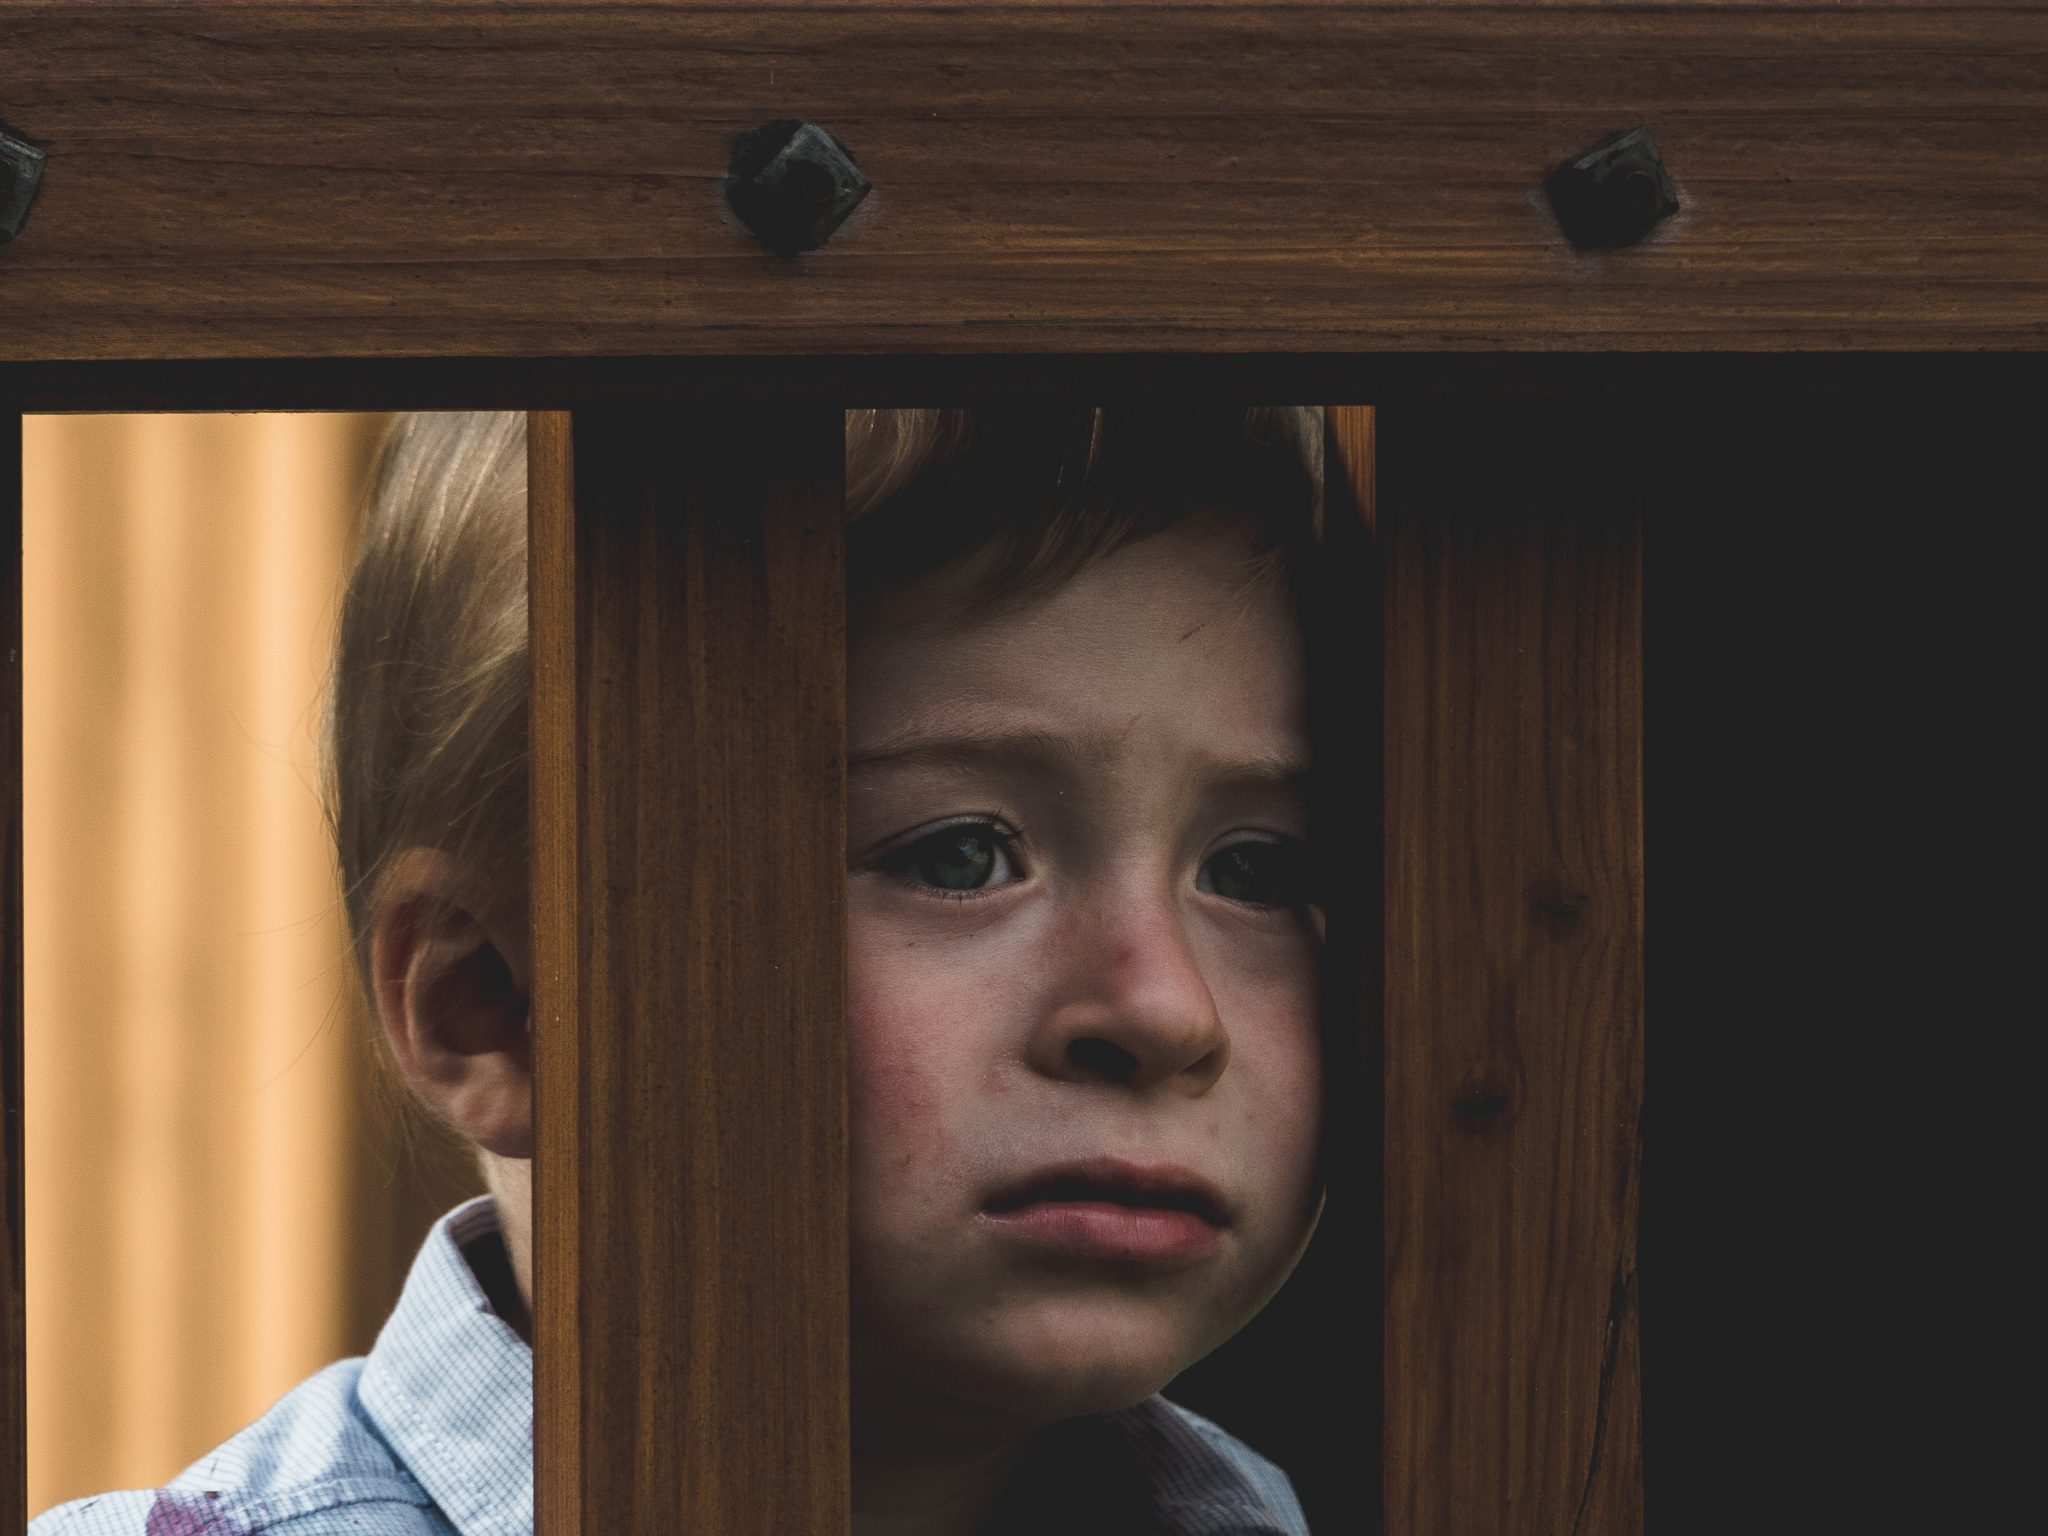 Children & Behavioral Problems – What is Applied Behavior Analysis (ABA) Therapy?